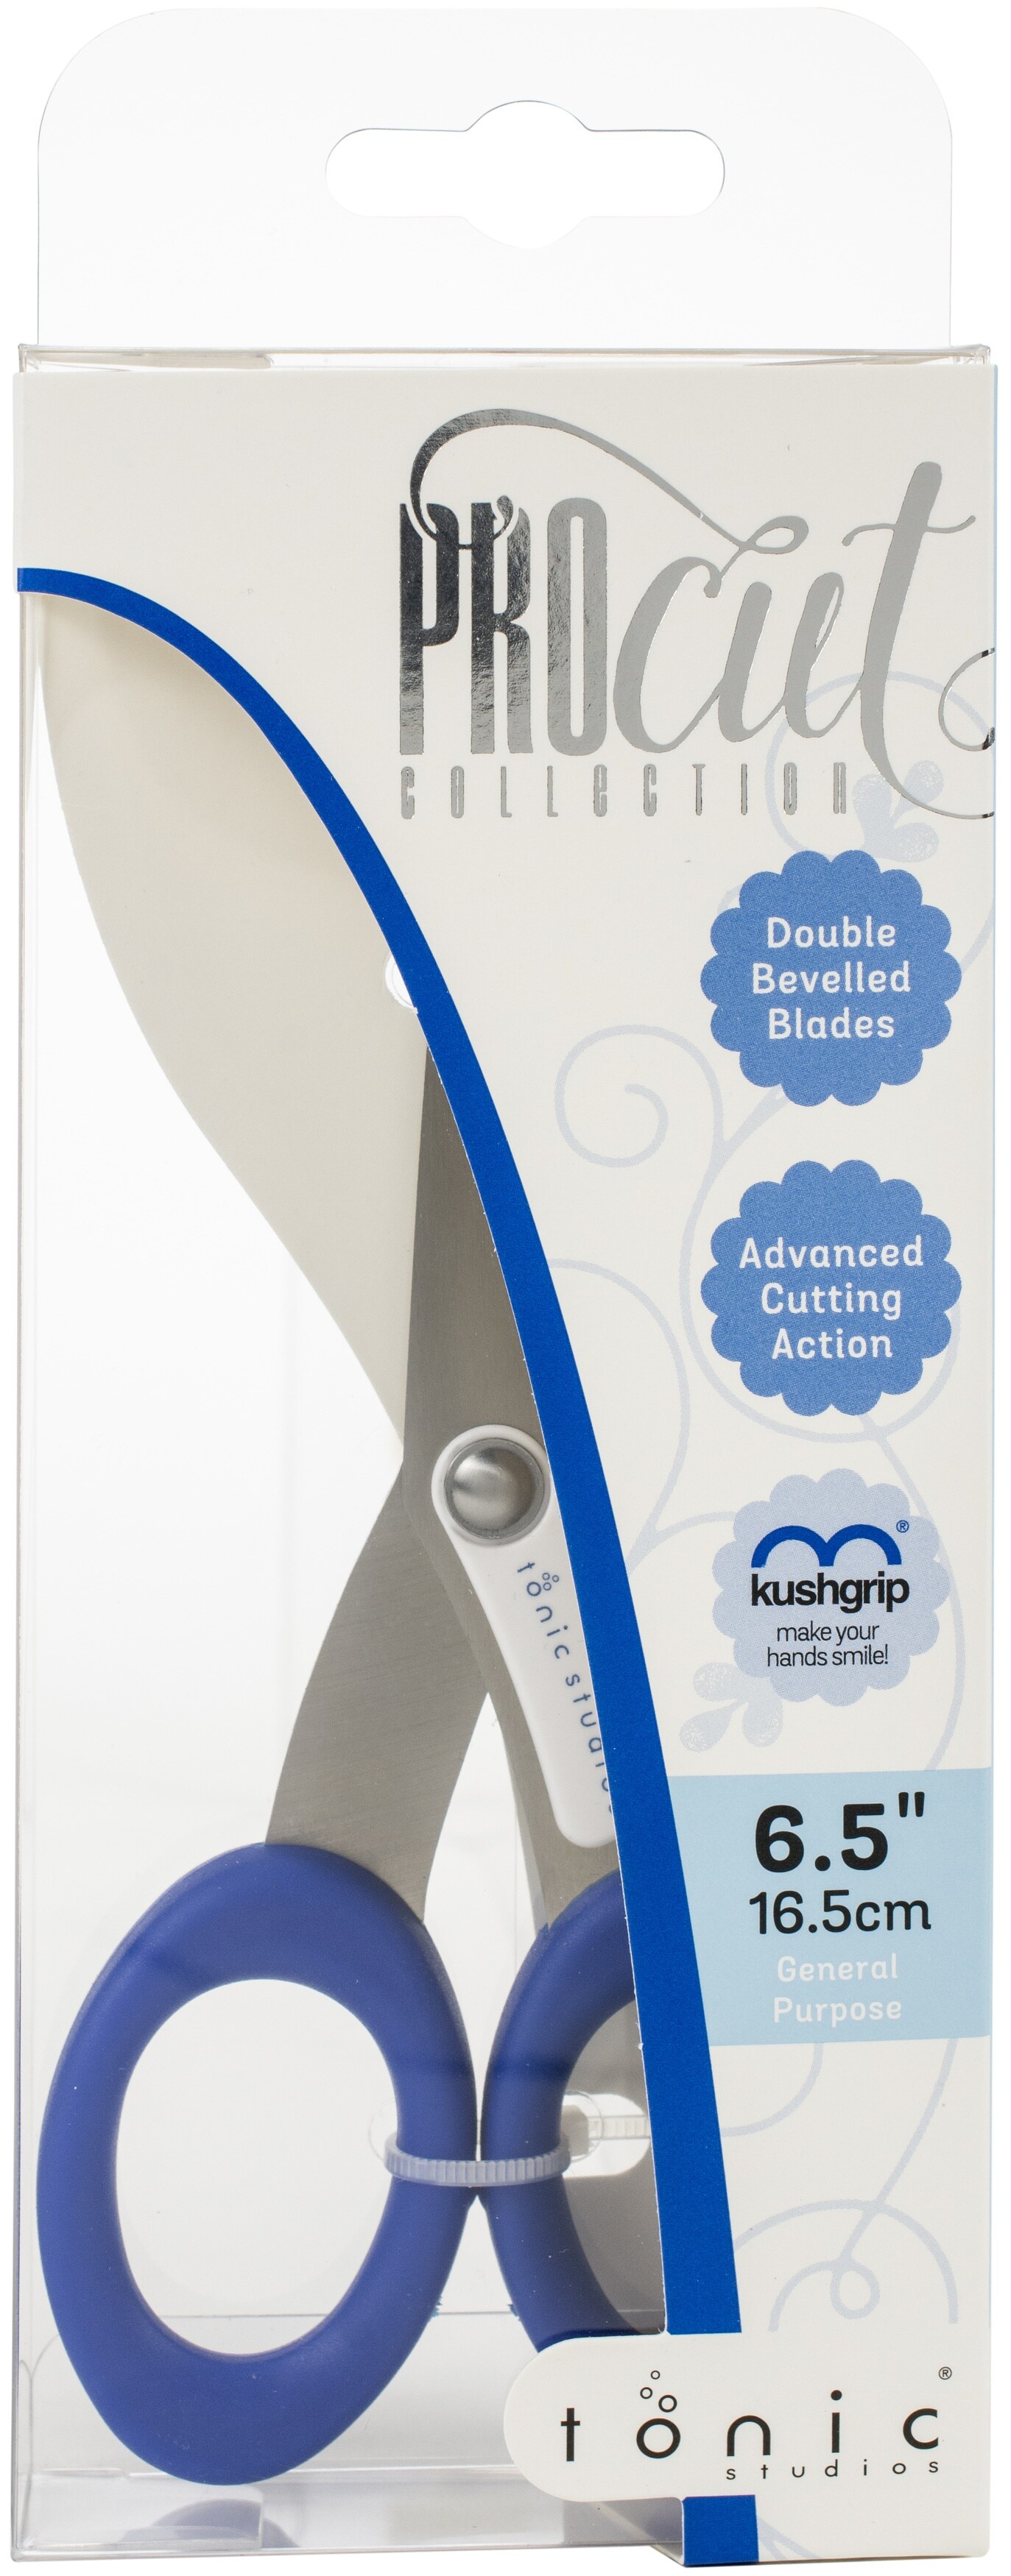 Tim Holtz Small Scissors - 6 Inch Scissors All Purpose for Cutting Fabric,  Crafting, and Sewing - Heavy Duty Mini Scissors with Titanium Micro Point  and Comfort Grip